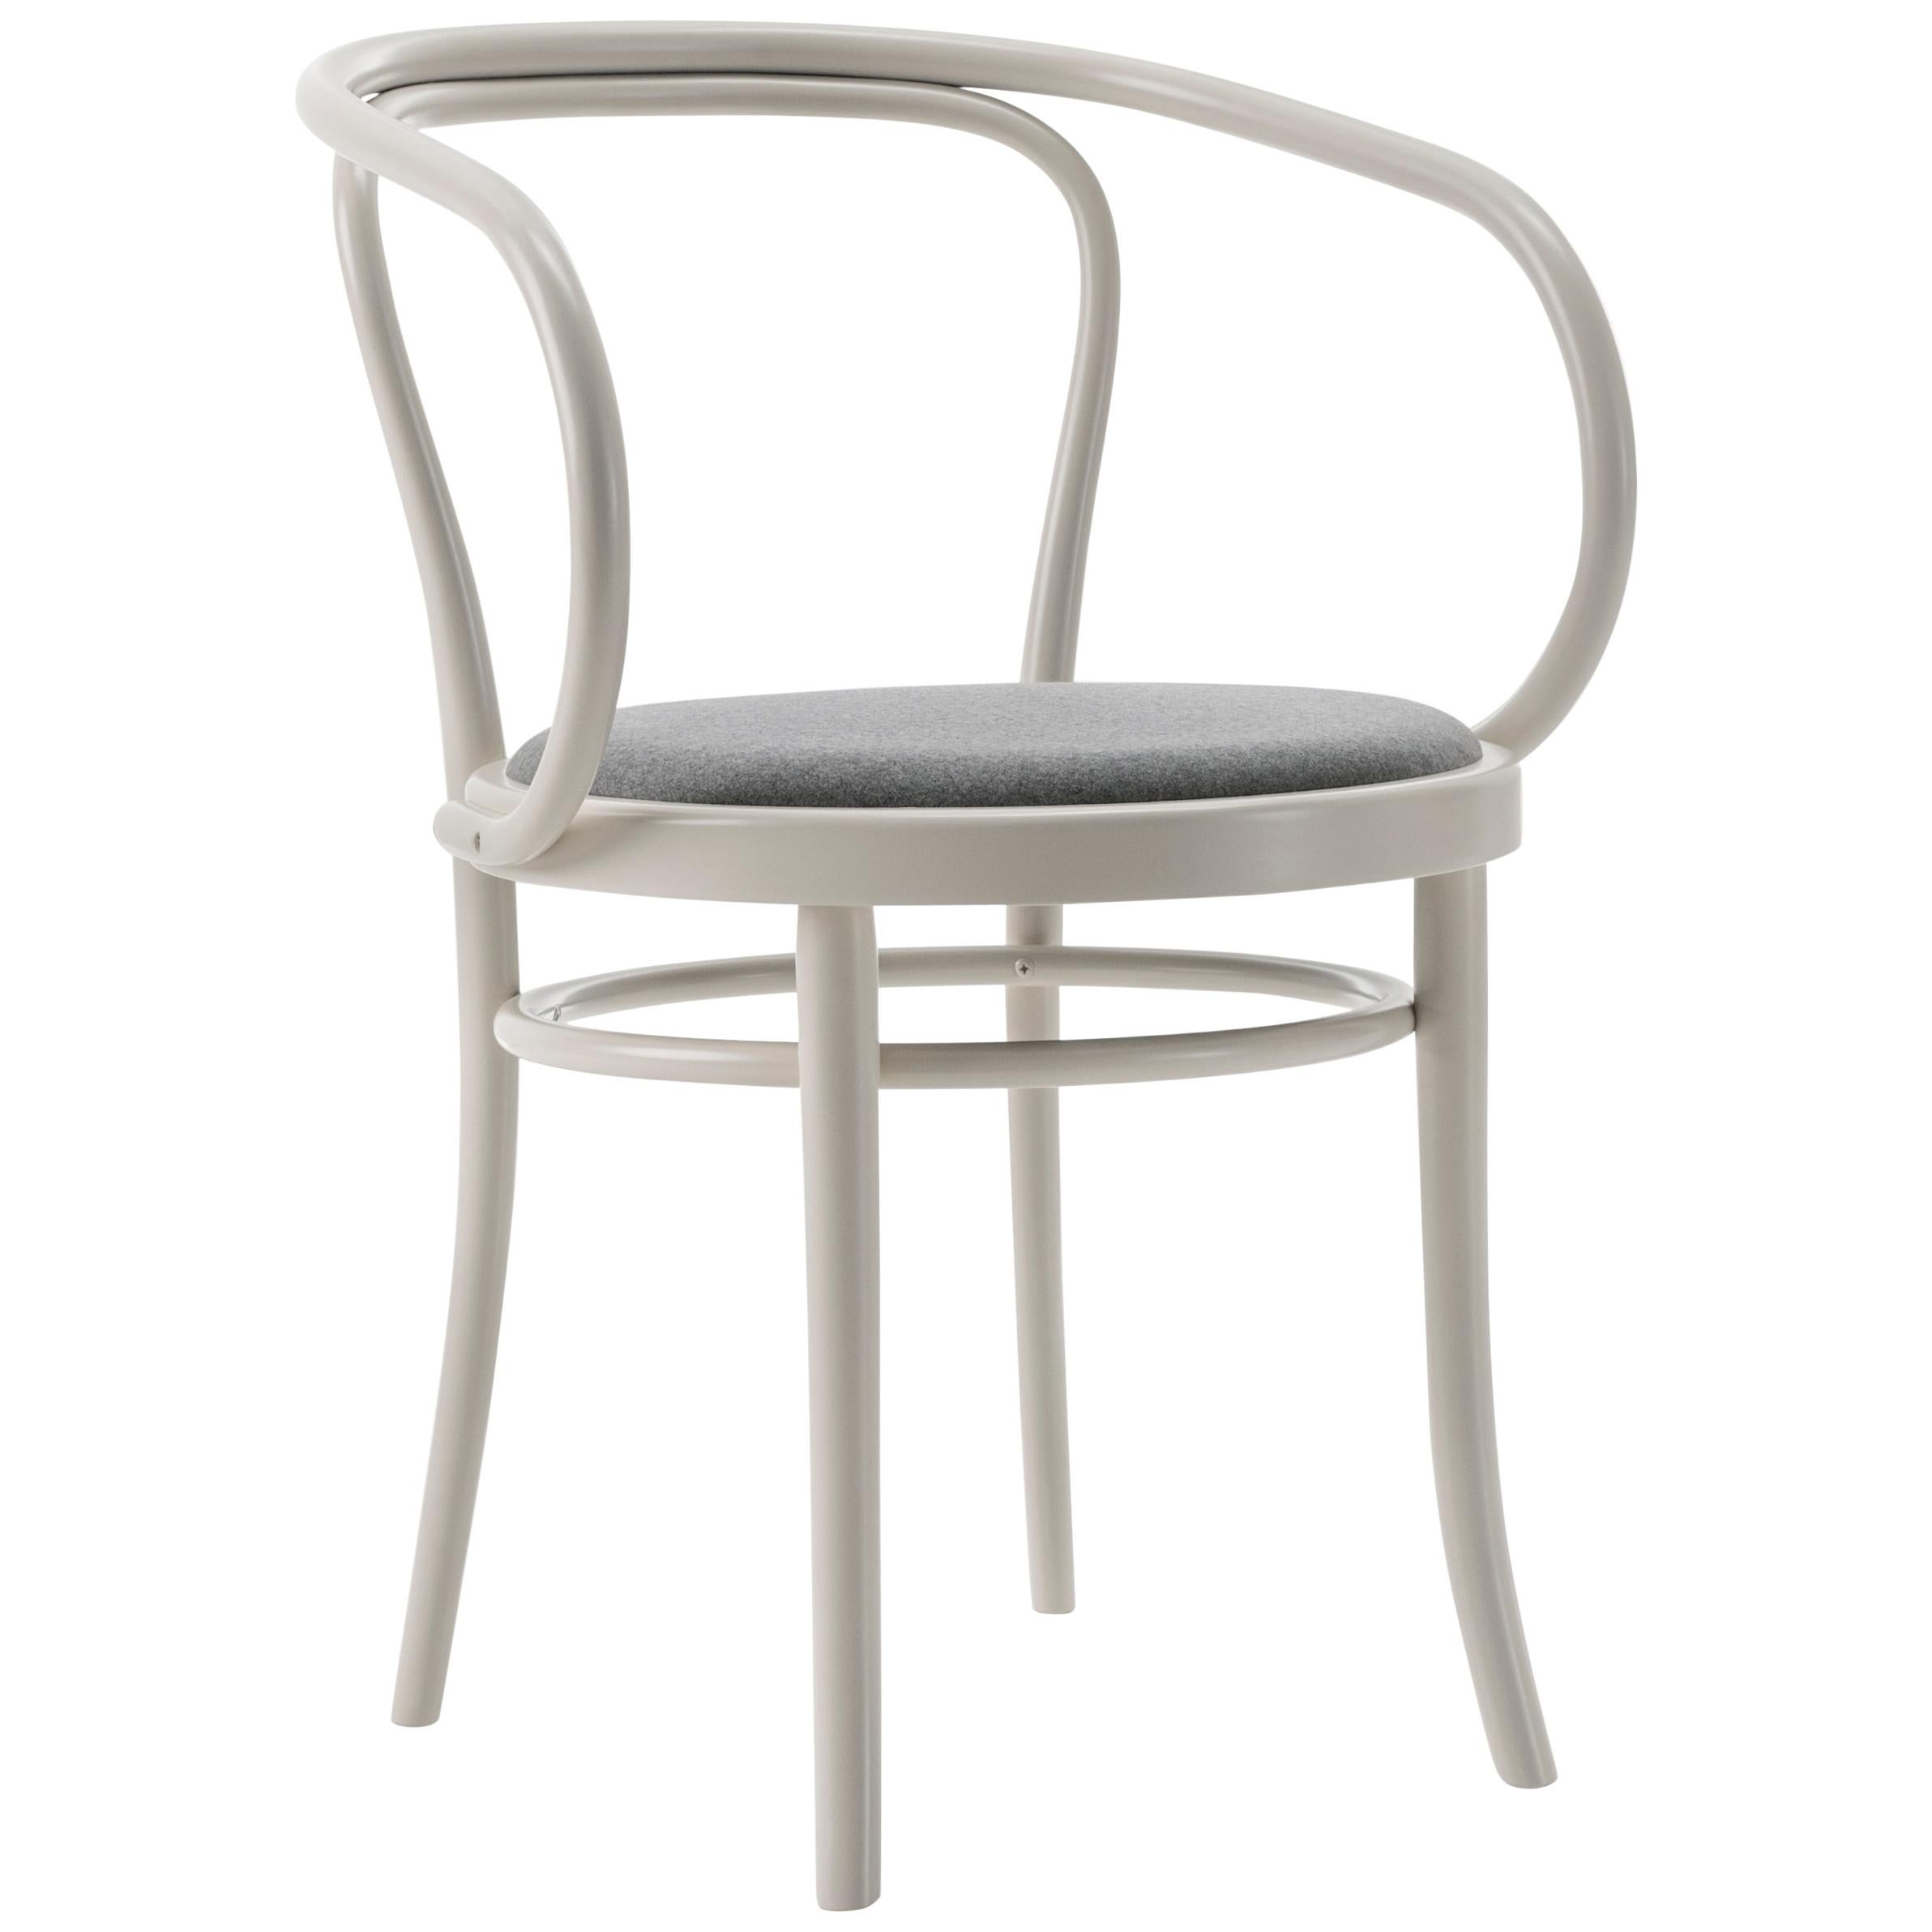 Gebrüder Thonet Vienna GmbH Wiener Stuhl Chair in White with Upholstered Seat For Sale